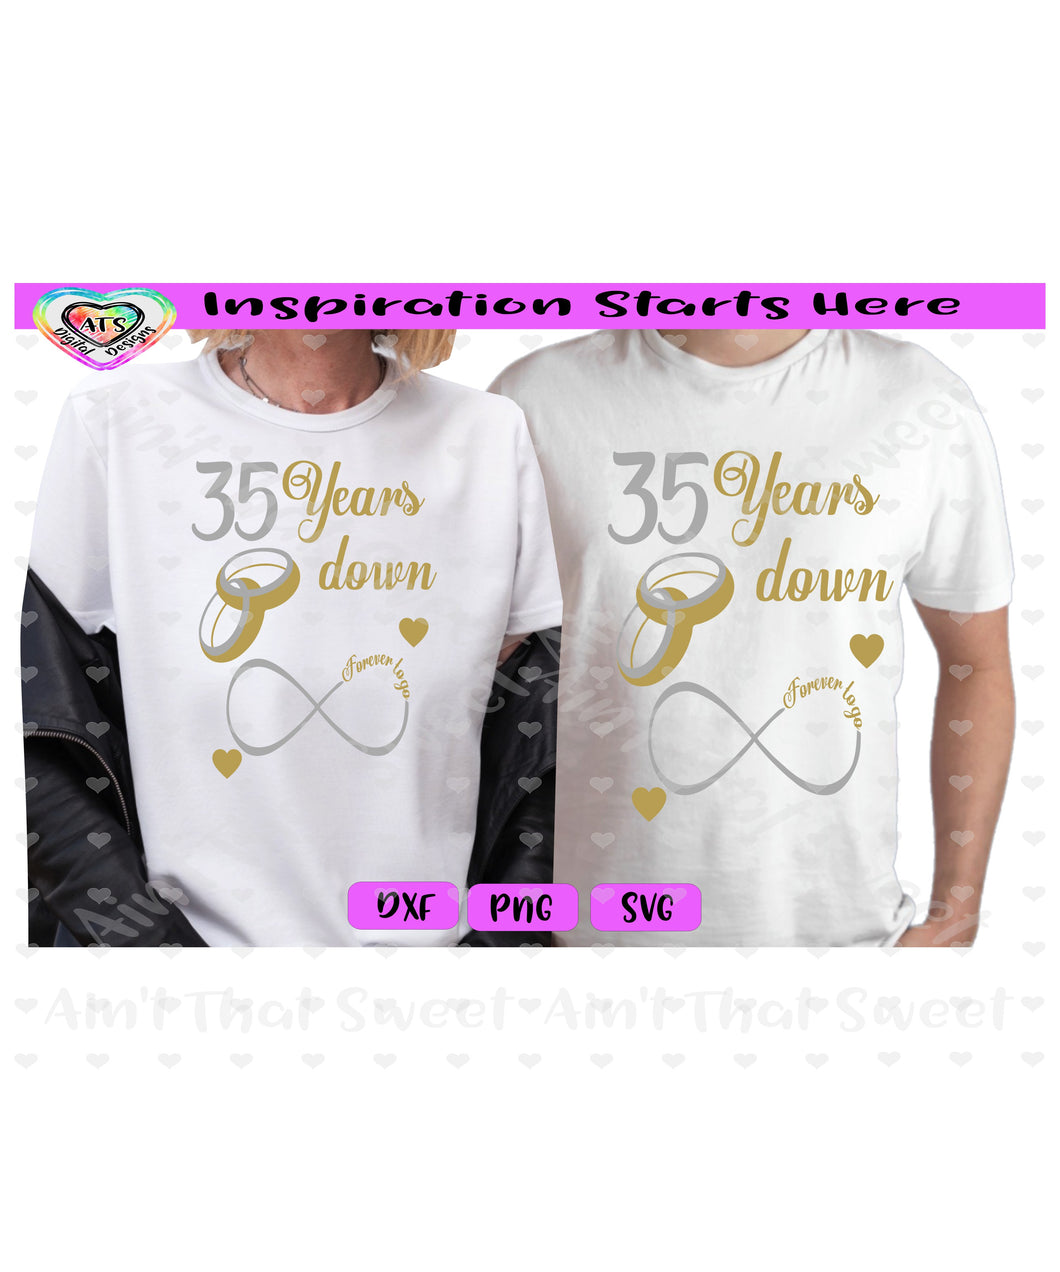 35 Years Down - Forever To Go | Wedding Rings | Infinity - Transparent PNG SVG DXF - Silhouette, Cricut, Scan N Cut